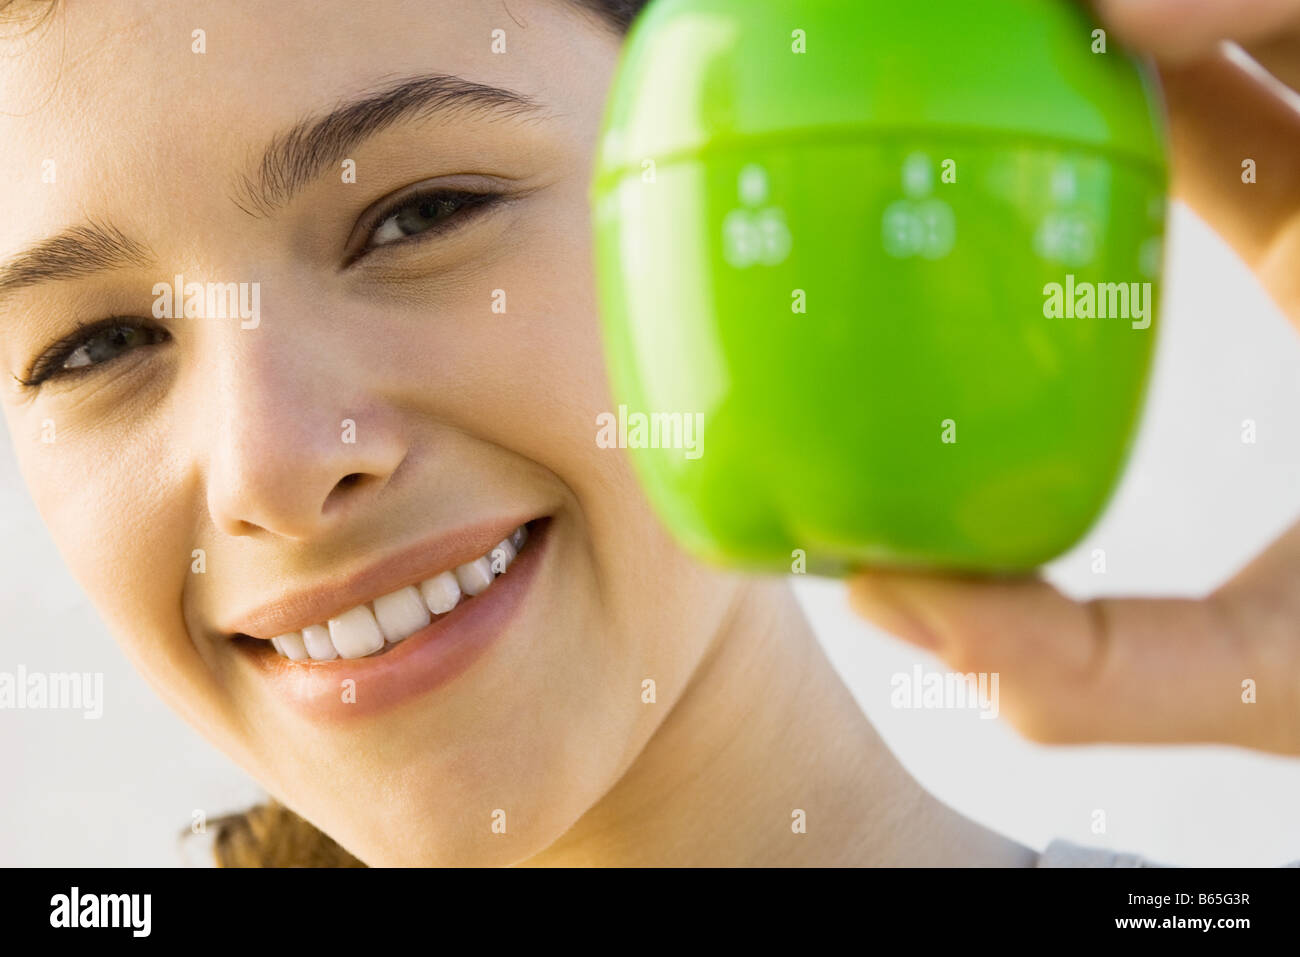 Woman holding up kitchen timer, smiling at camera, focus on background Stock Photo